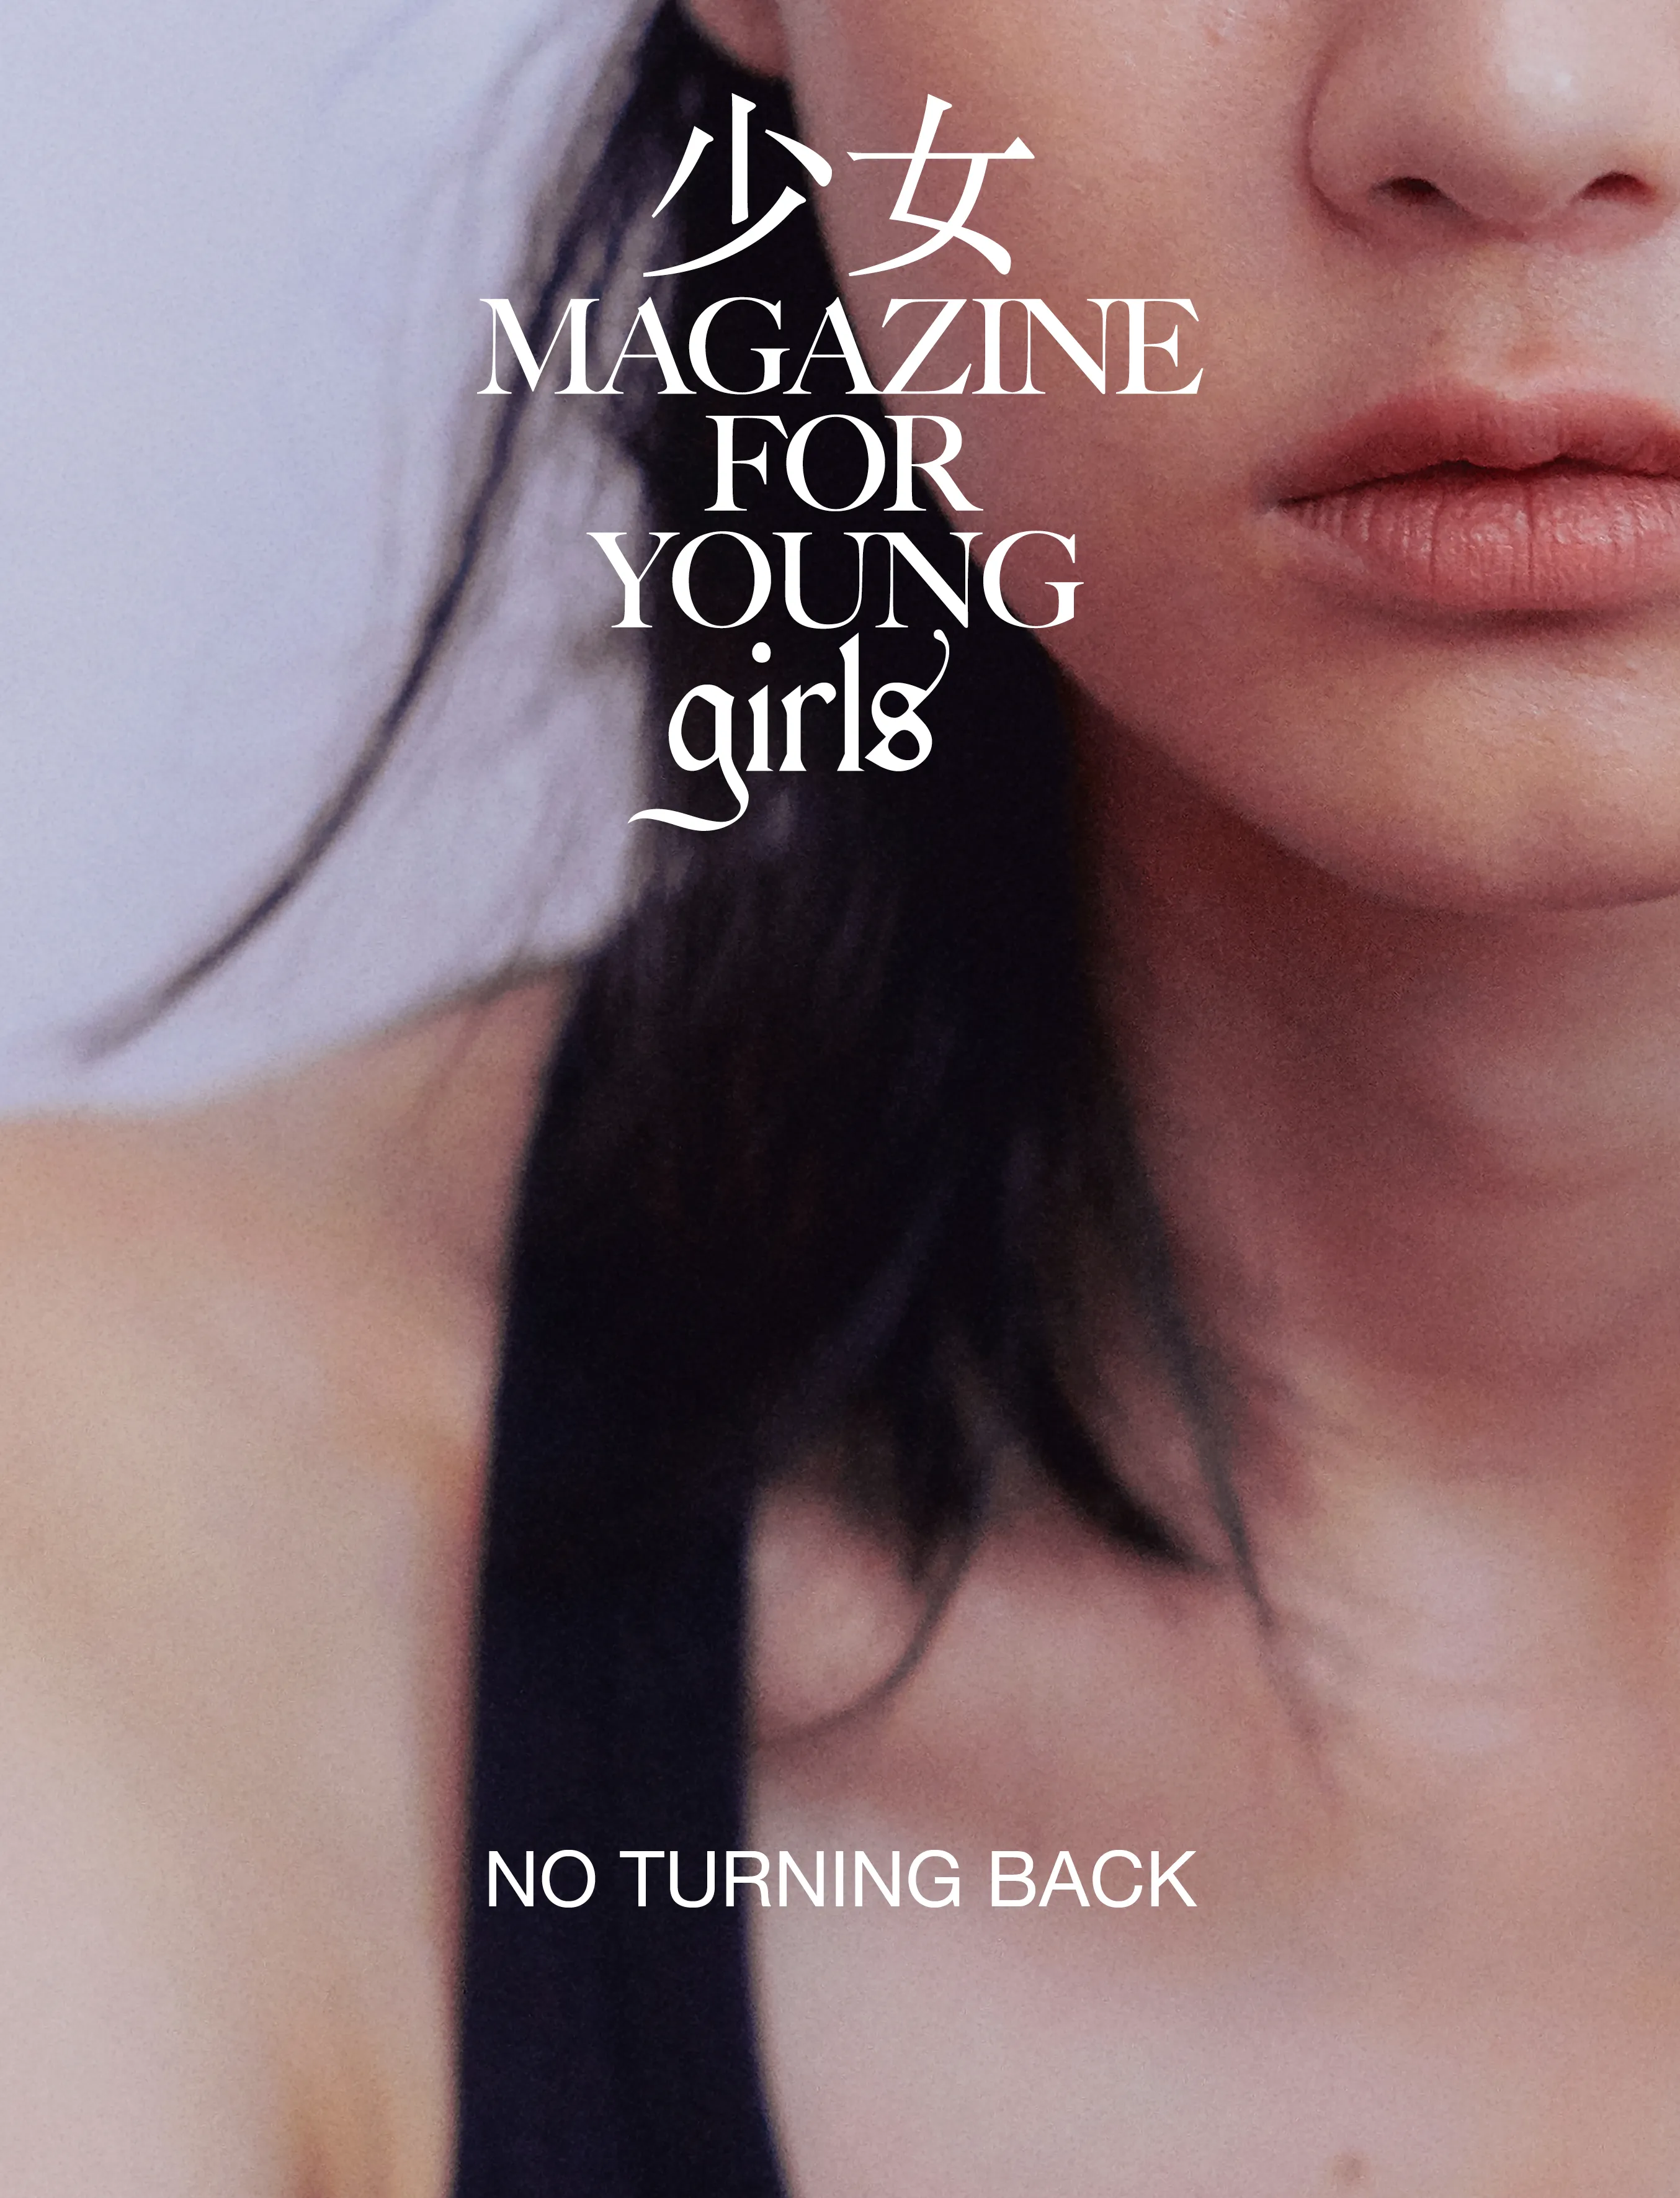 What if your life doesn't fit in with the media? Magazine for Young Girls  is an escape through print